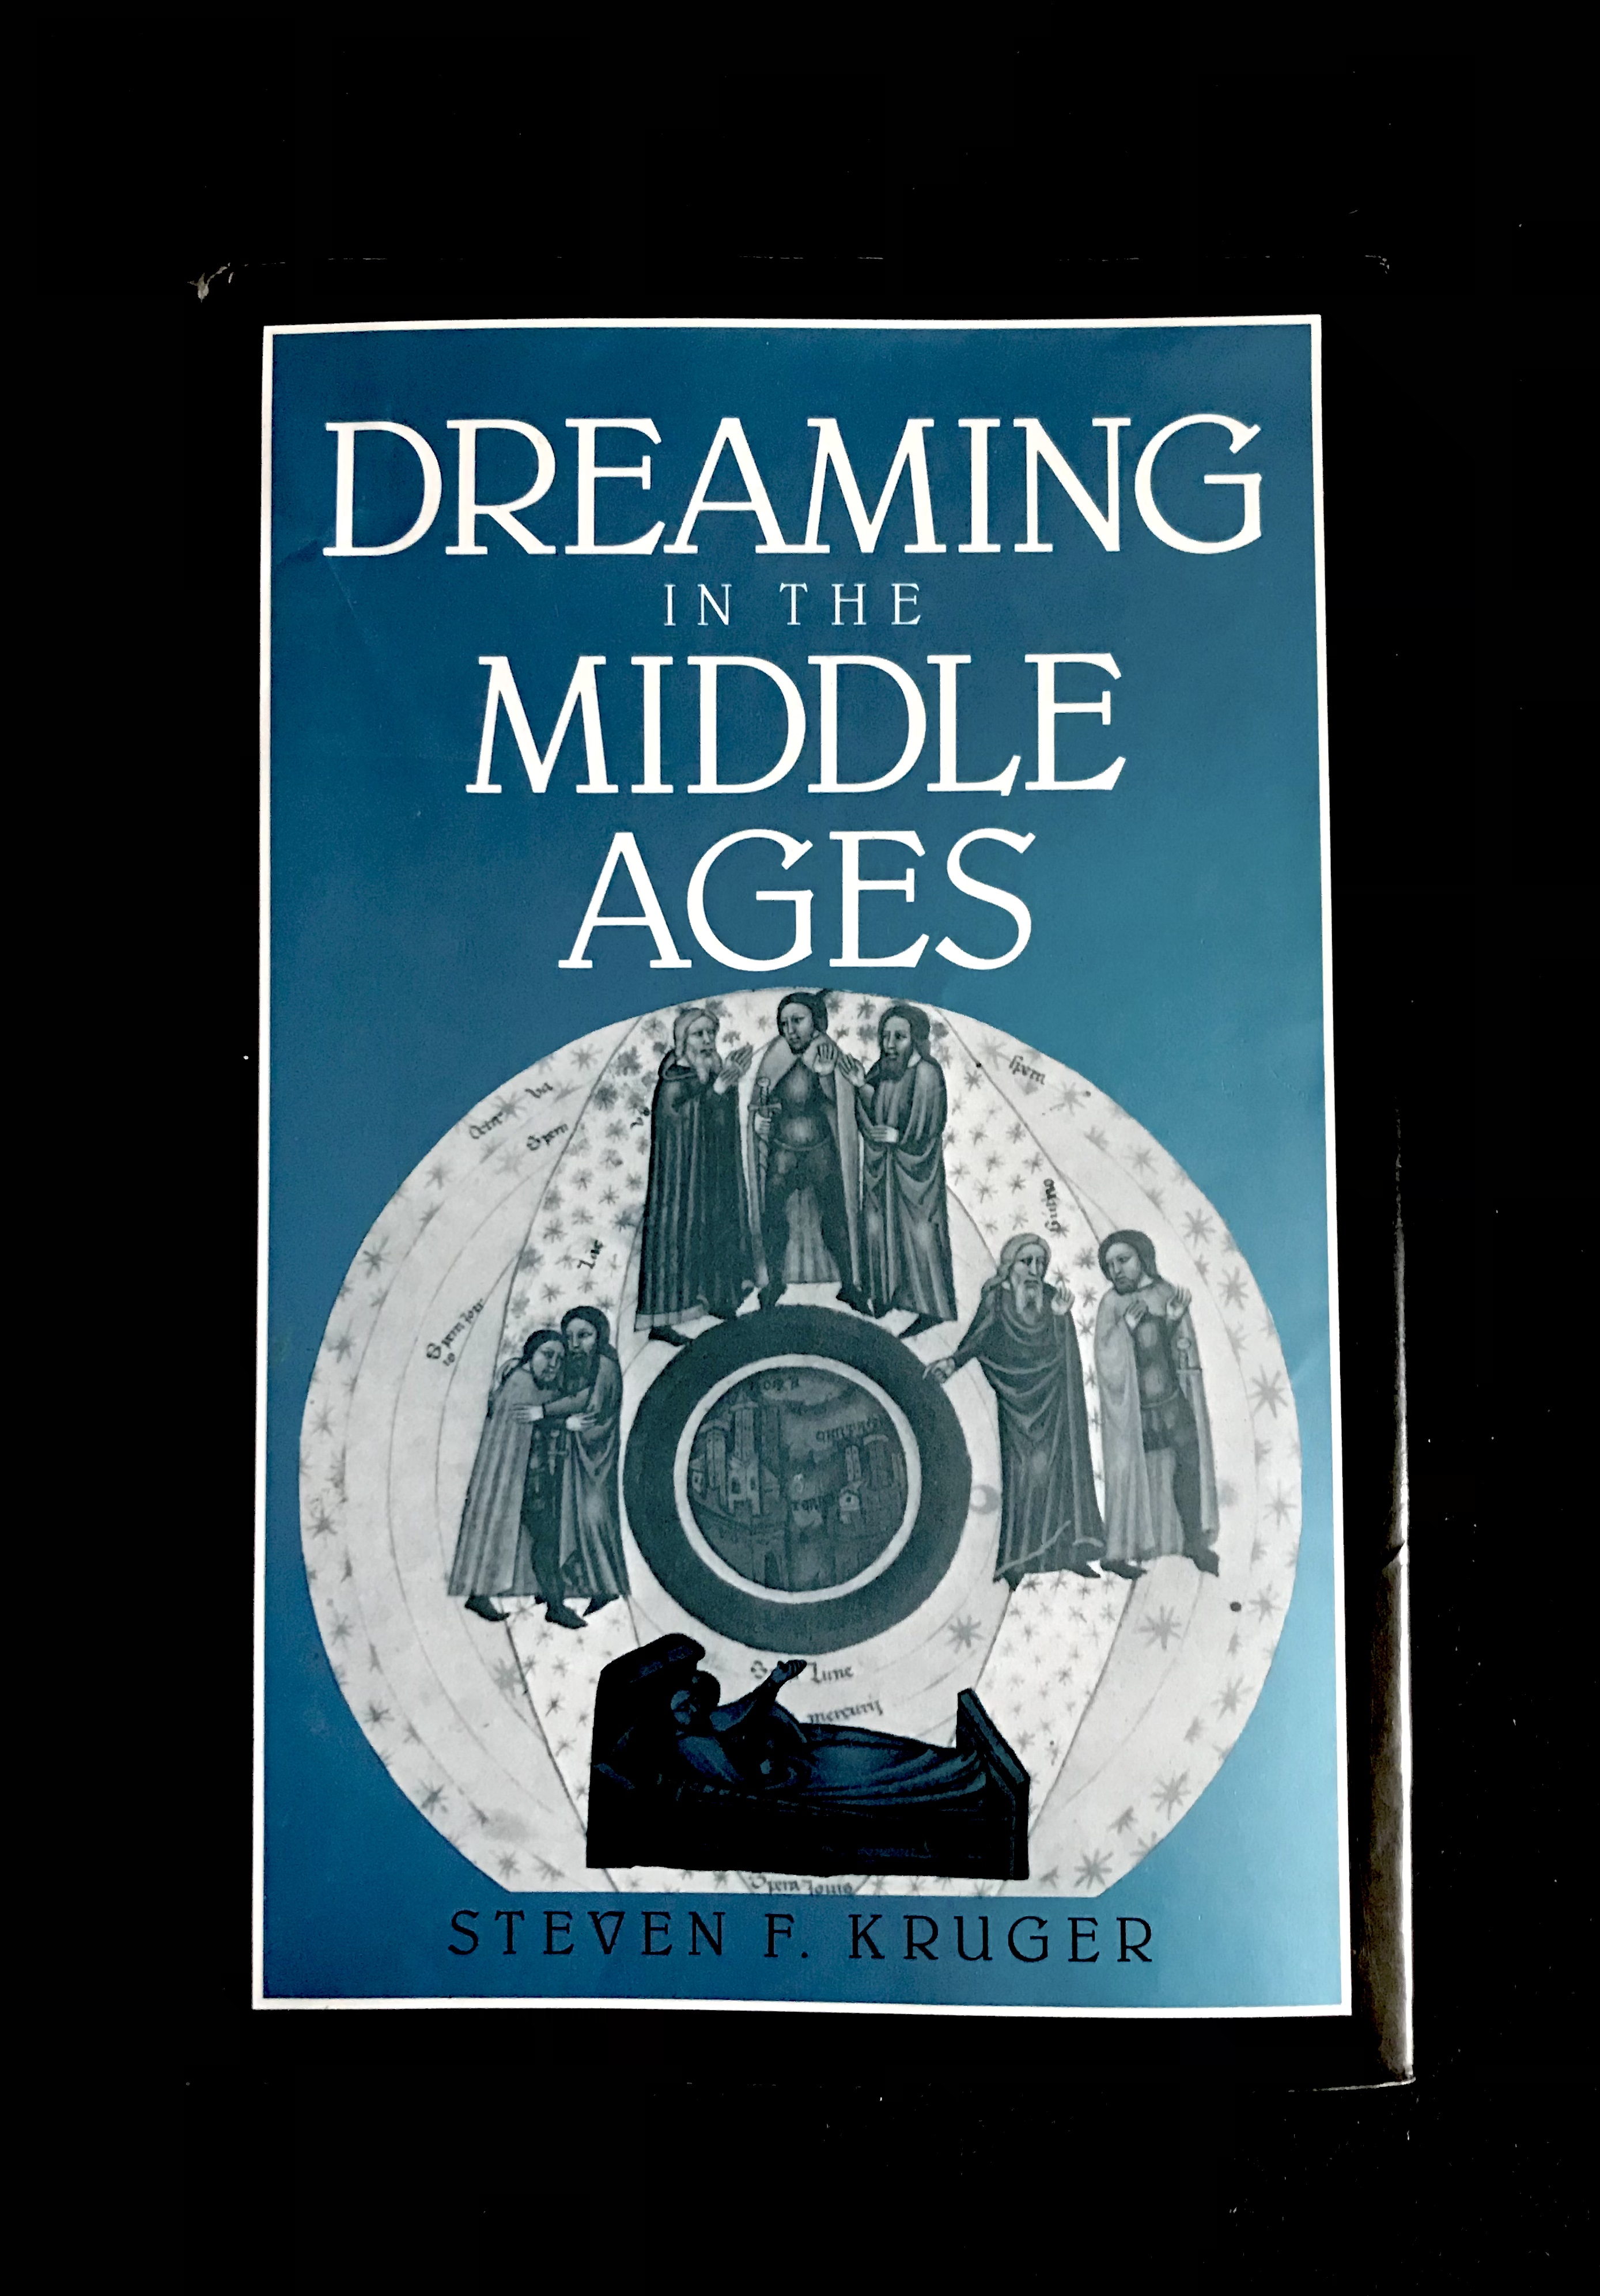 Dreaming In The Middle Ages by Steven F. Kruger